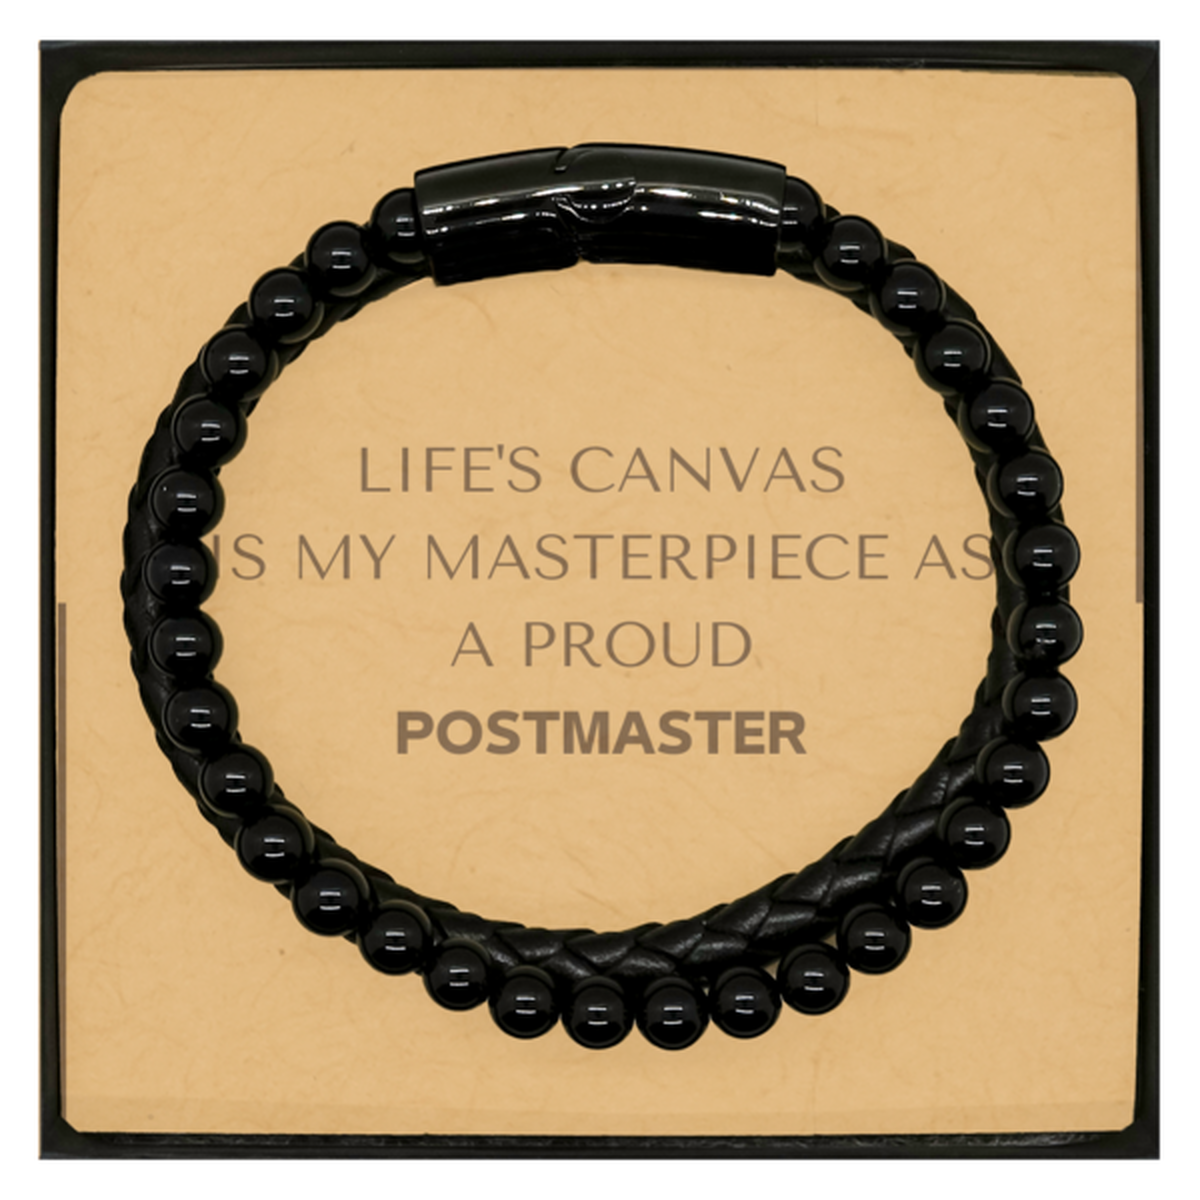 Proud Postmaster Gifts, Life's canvas is my masterpiece, Epic Birthday Christmas Unique Stone Leather Bracelets For Postmaster, Coworkers, Men, Women, Friends